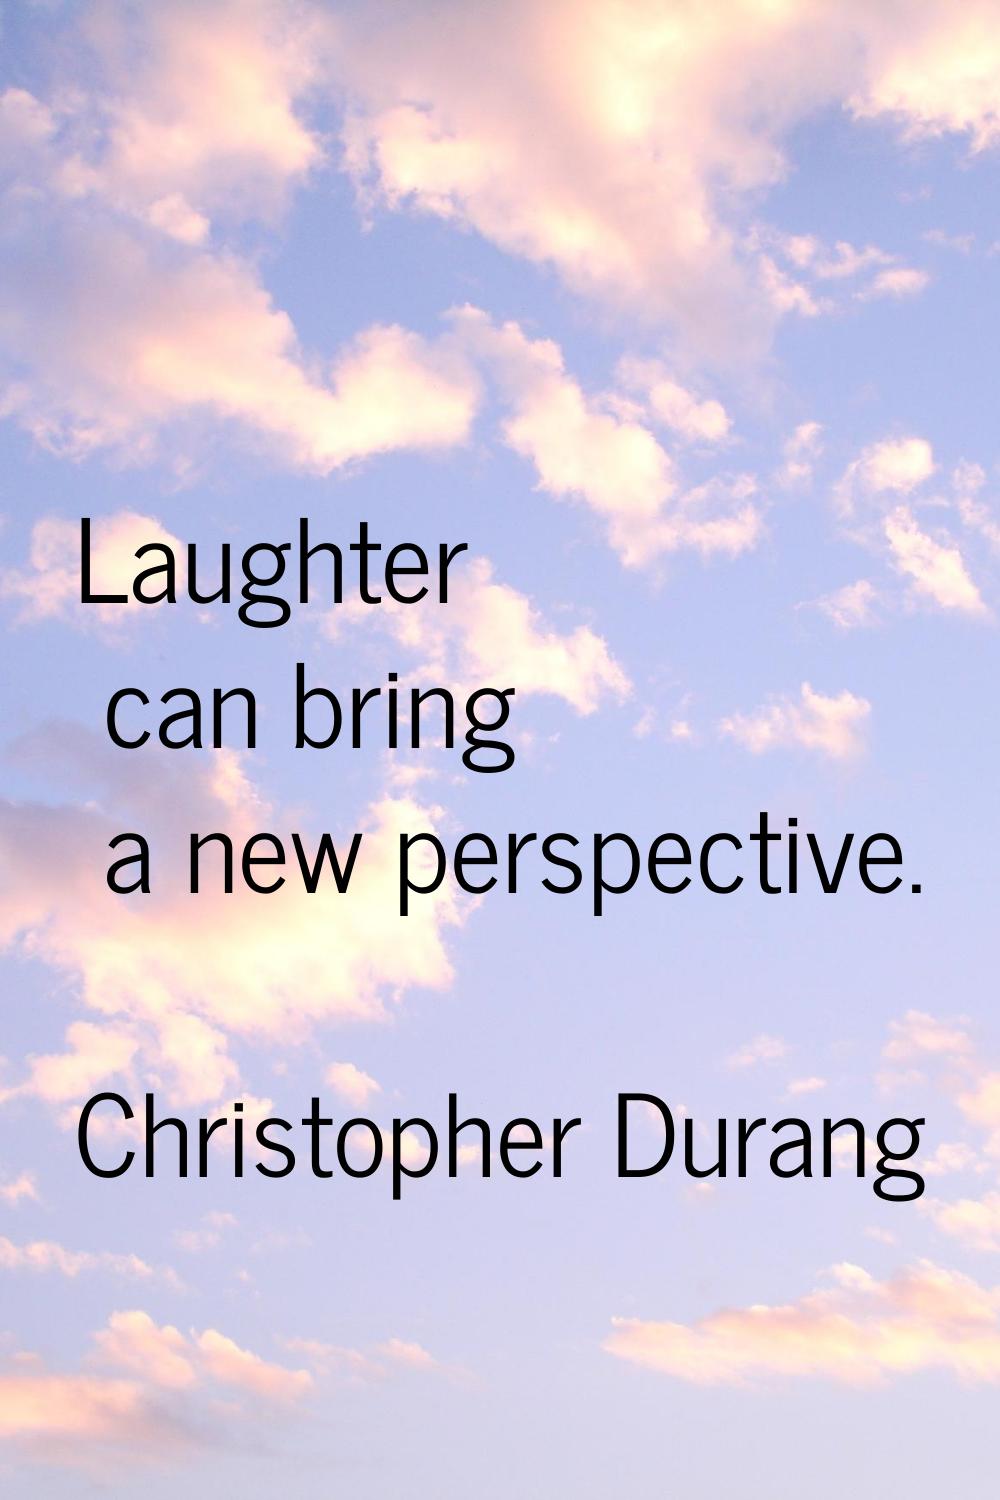 Laughter can bring a new perspective.